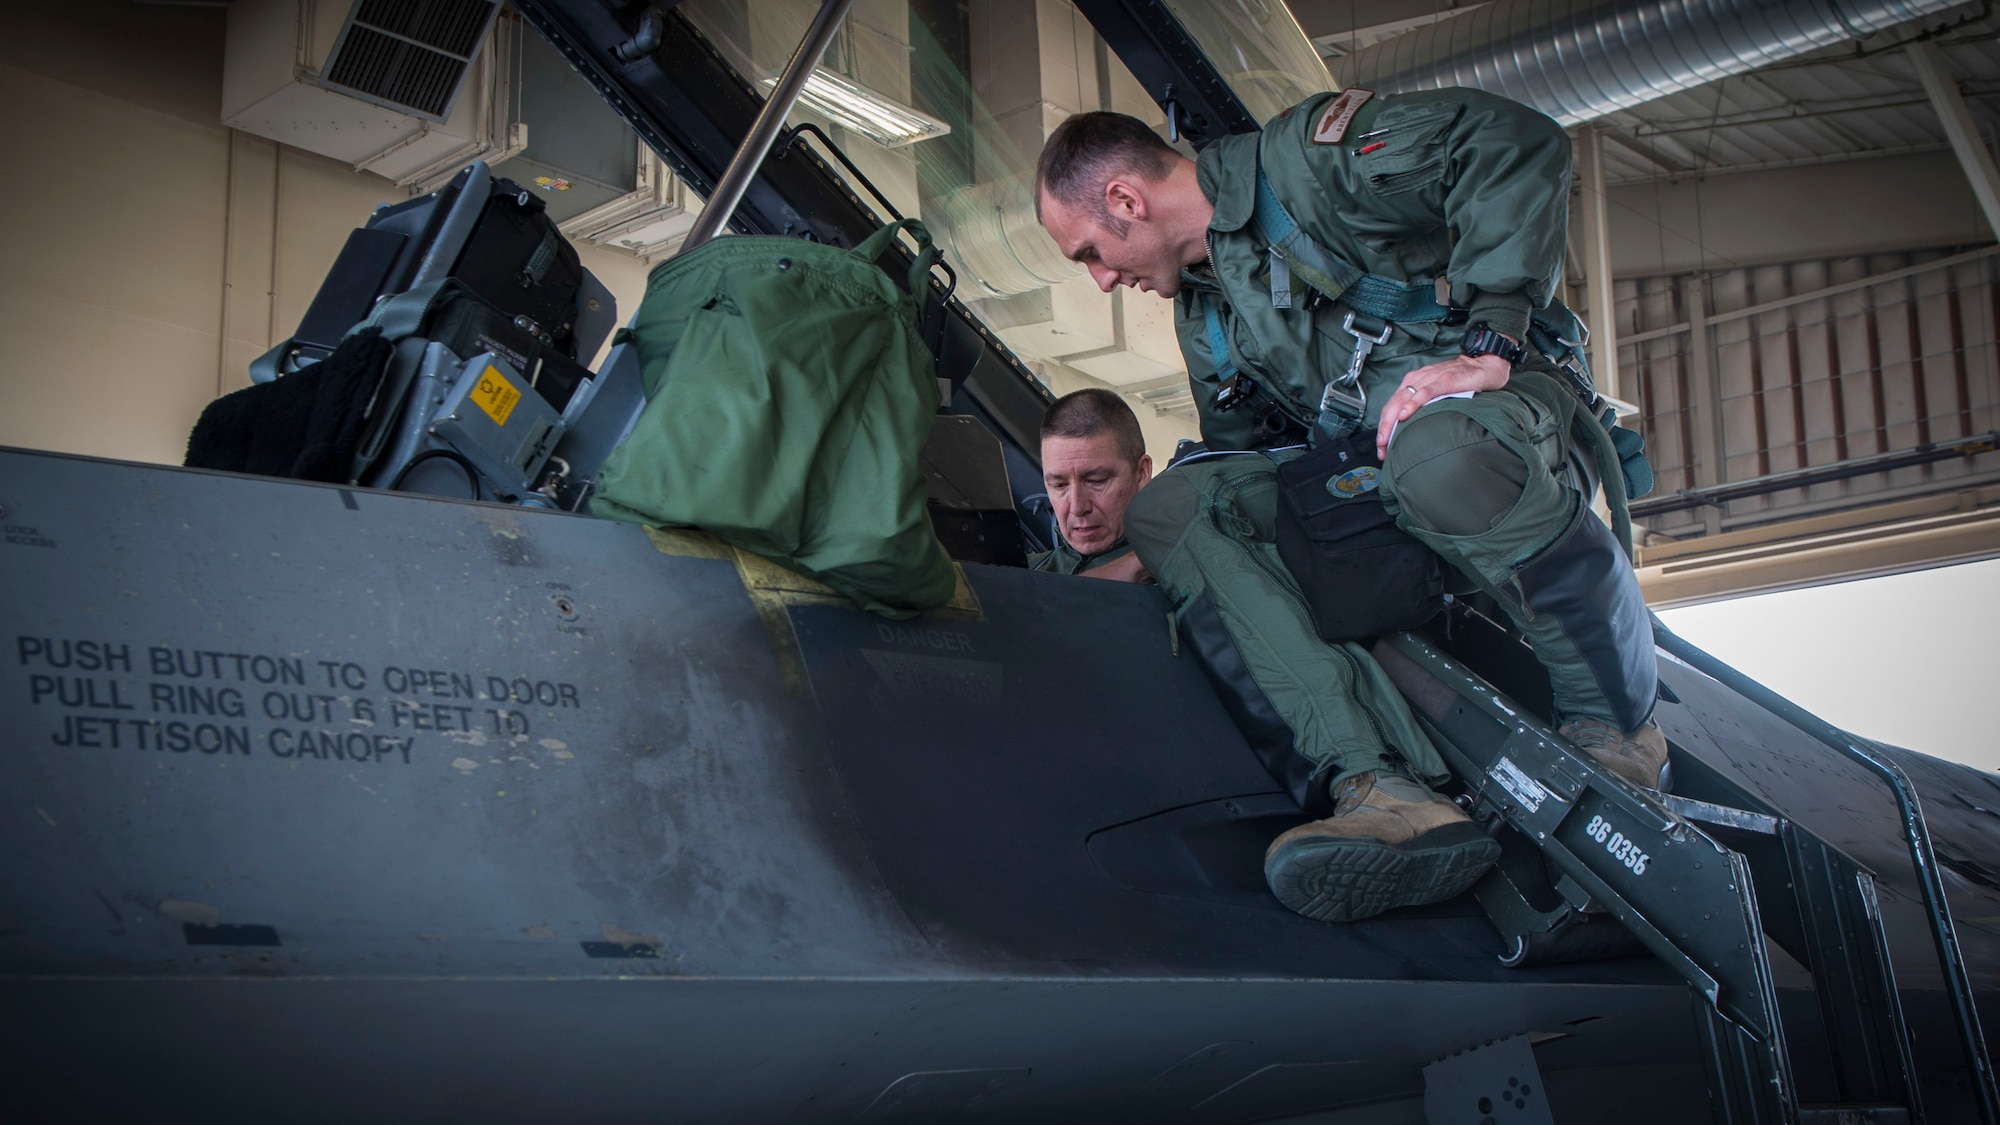 Maj. Brent Ellis, a fighter pilot with the 311th Fighter Squadron, instructs Brig. Gen. Eric Sanchez, the Commanding General at White Sands Missile Range, on basic flight procedures prior to a familiarization flight in an F-16 Fighting Falcon, at Holloman Air Force Base, N.M., on Jan. 9, 2017. Sanchez visited Holloman AFB to attend an airspace and mission brief related to Holloman and WSMR’s ongoing partnership. Sanchez was offered a flight in an F-16 Fighting Falcon to gain a better understanding of the aircraft’s mission and its capabilities. (U.S. Air Force photo by Airman 1st Class Alexis P. Docherty)